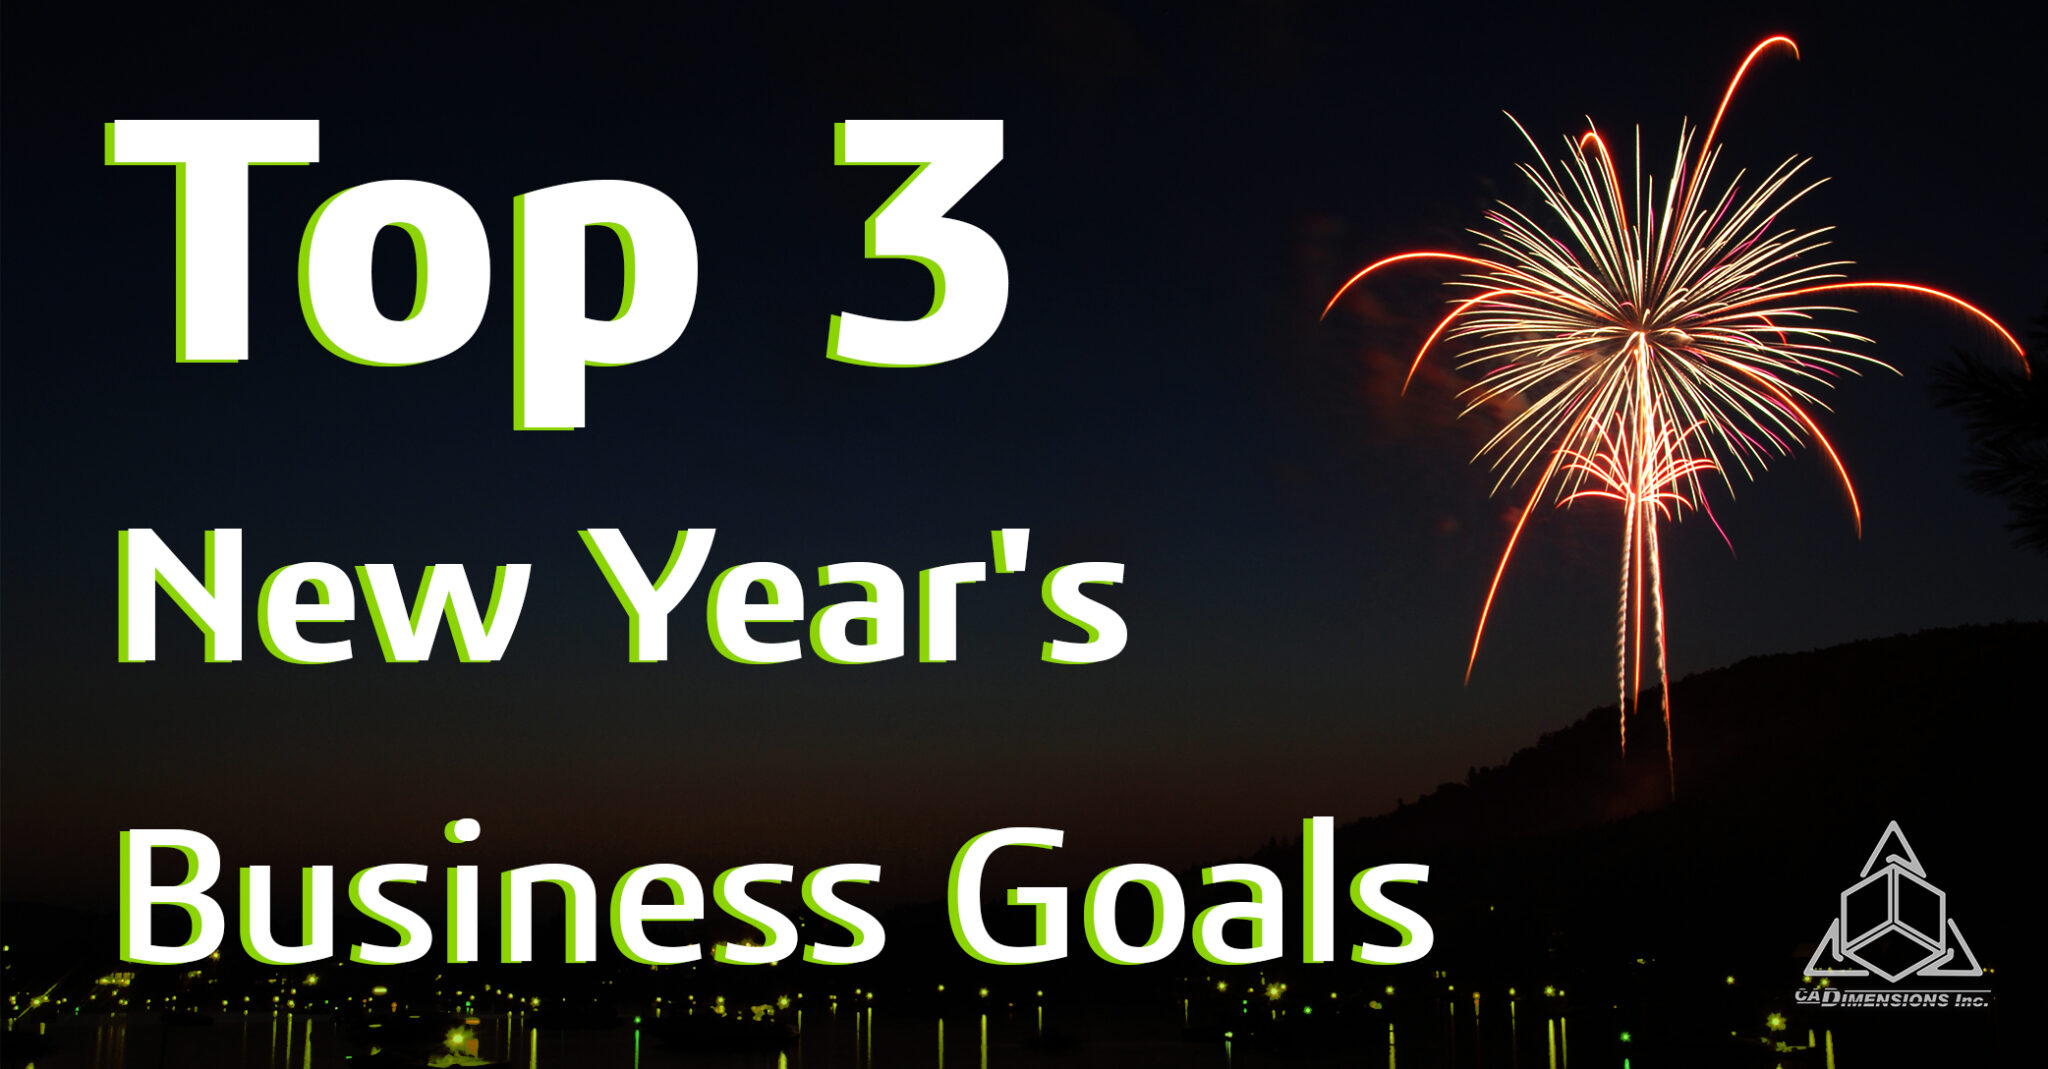 Top 3 New Years Business Goals from cadimensions